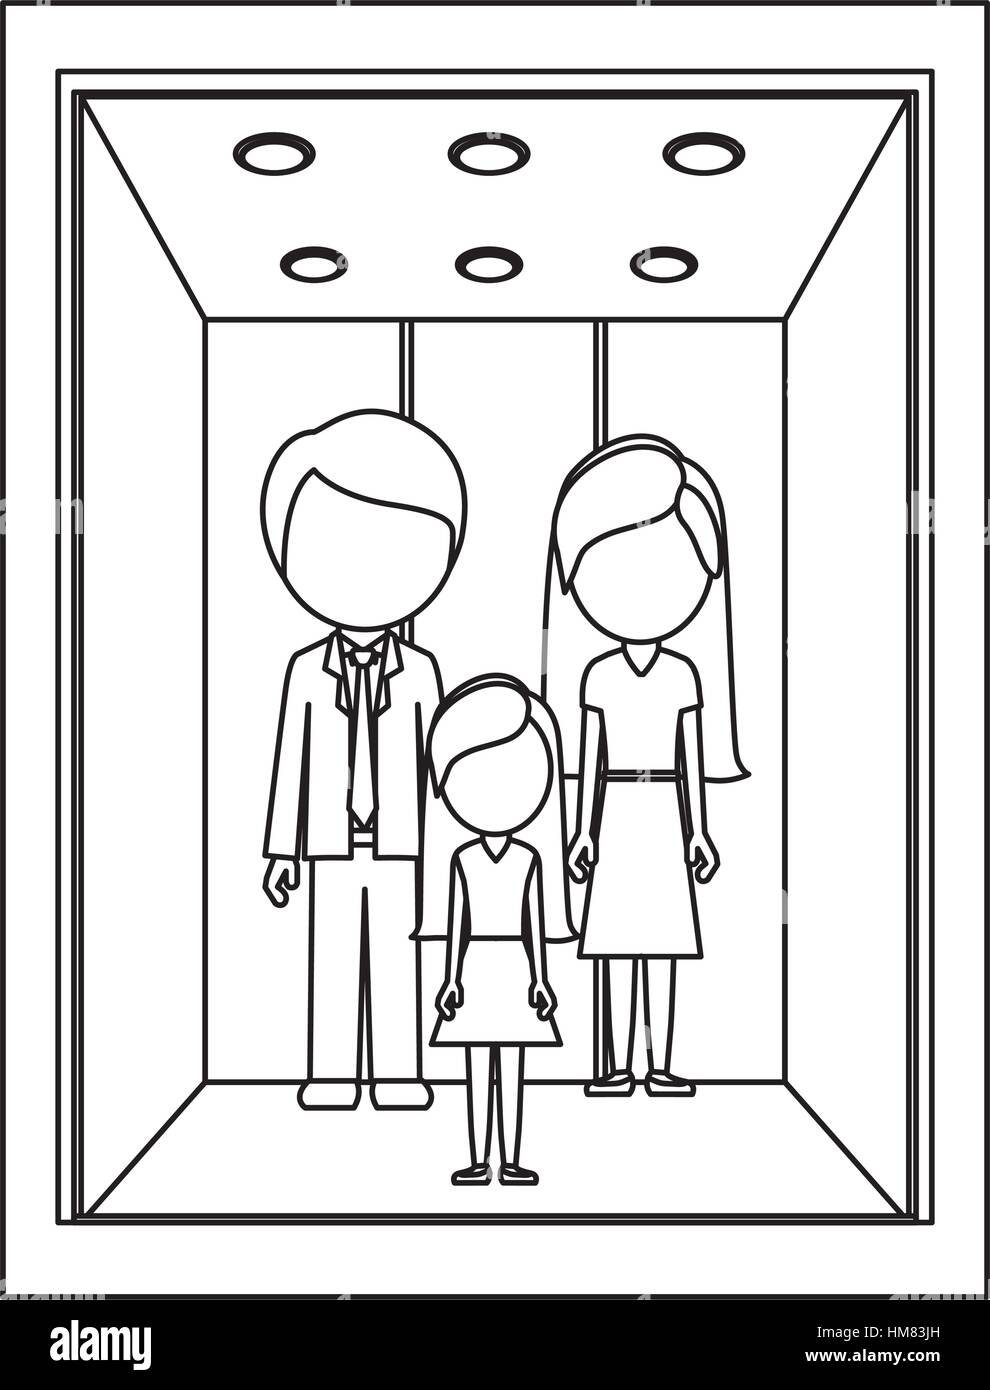 monochrome contour with open building elevator with people inside vector illustration Stock Vector